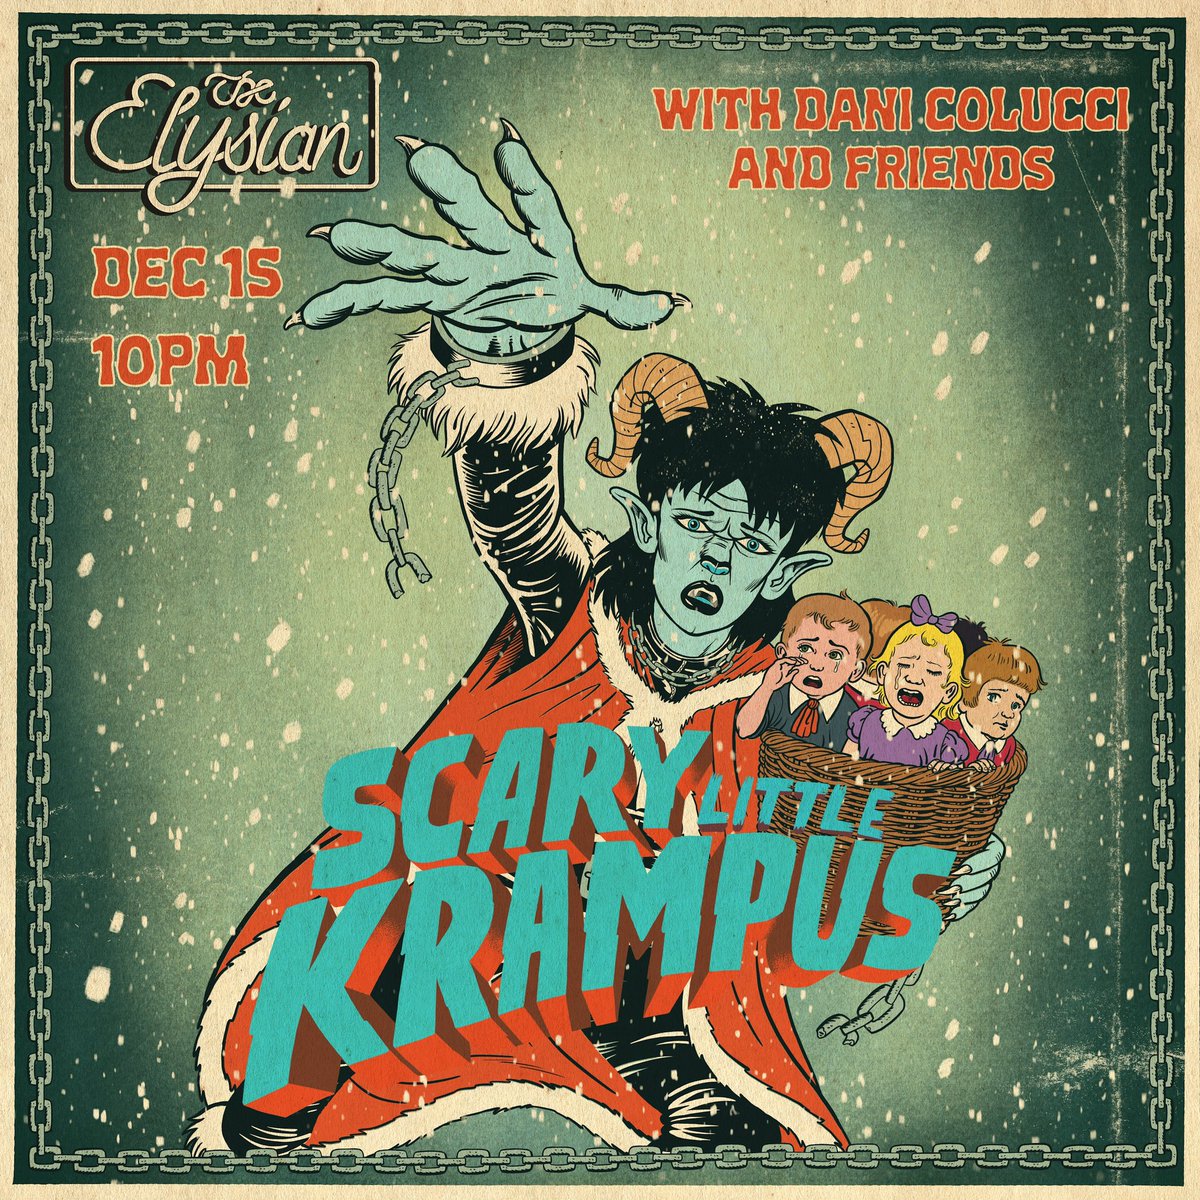 December 15th at @ElysianTheater Krampus! Puppets! Music! Drag! Dance! Wrestling! A storyline? Grab tix to our dark holiday play called SCARY LITTLE KRAMPUS👹⛓️ Tickets available at: elysiantheater.com/shows/krampus